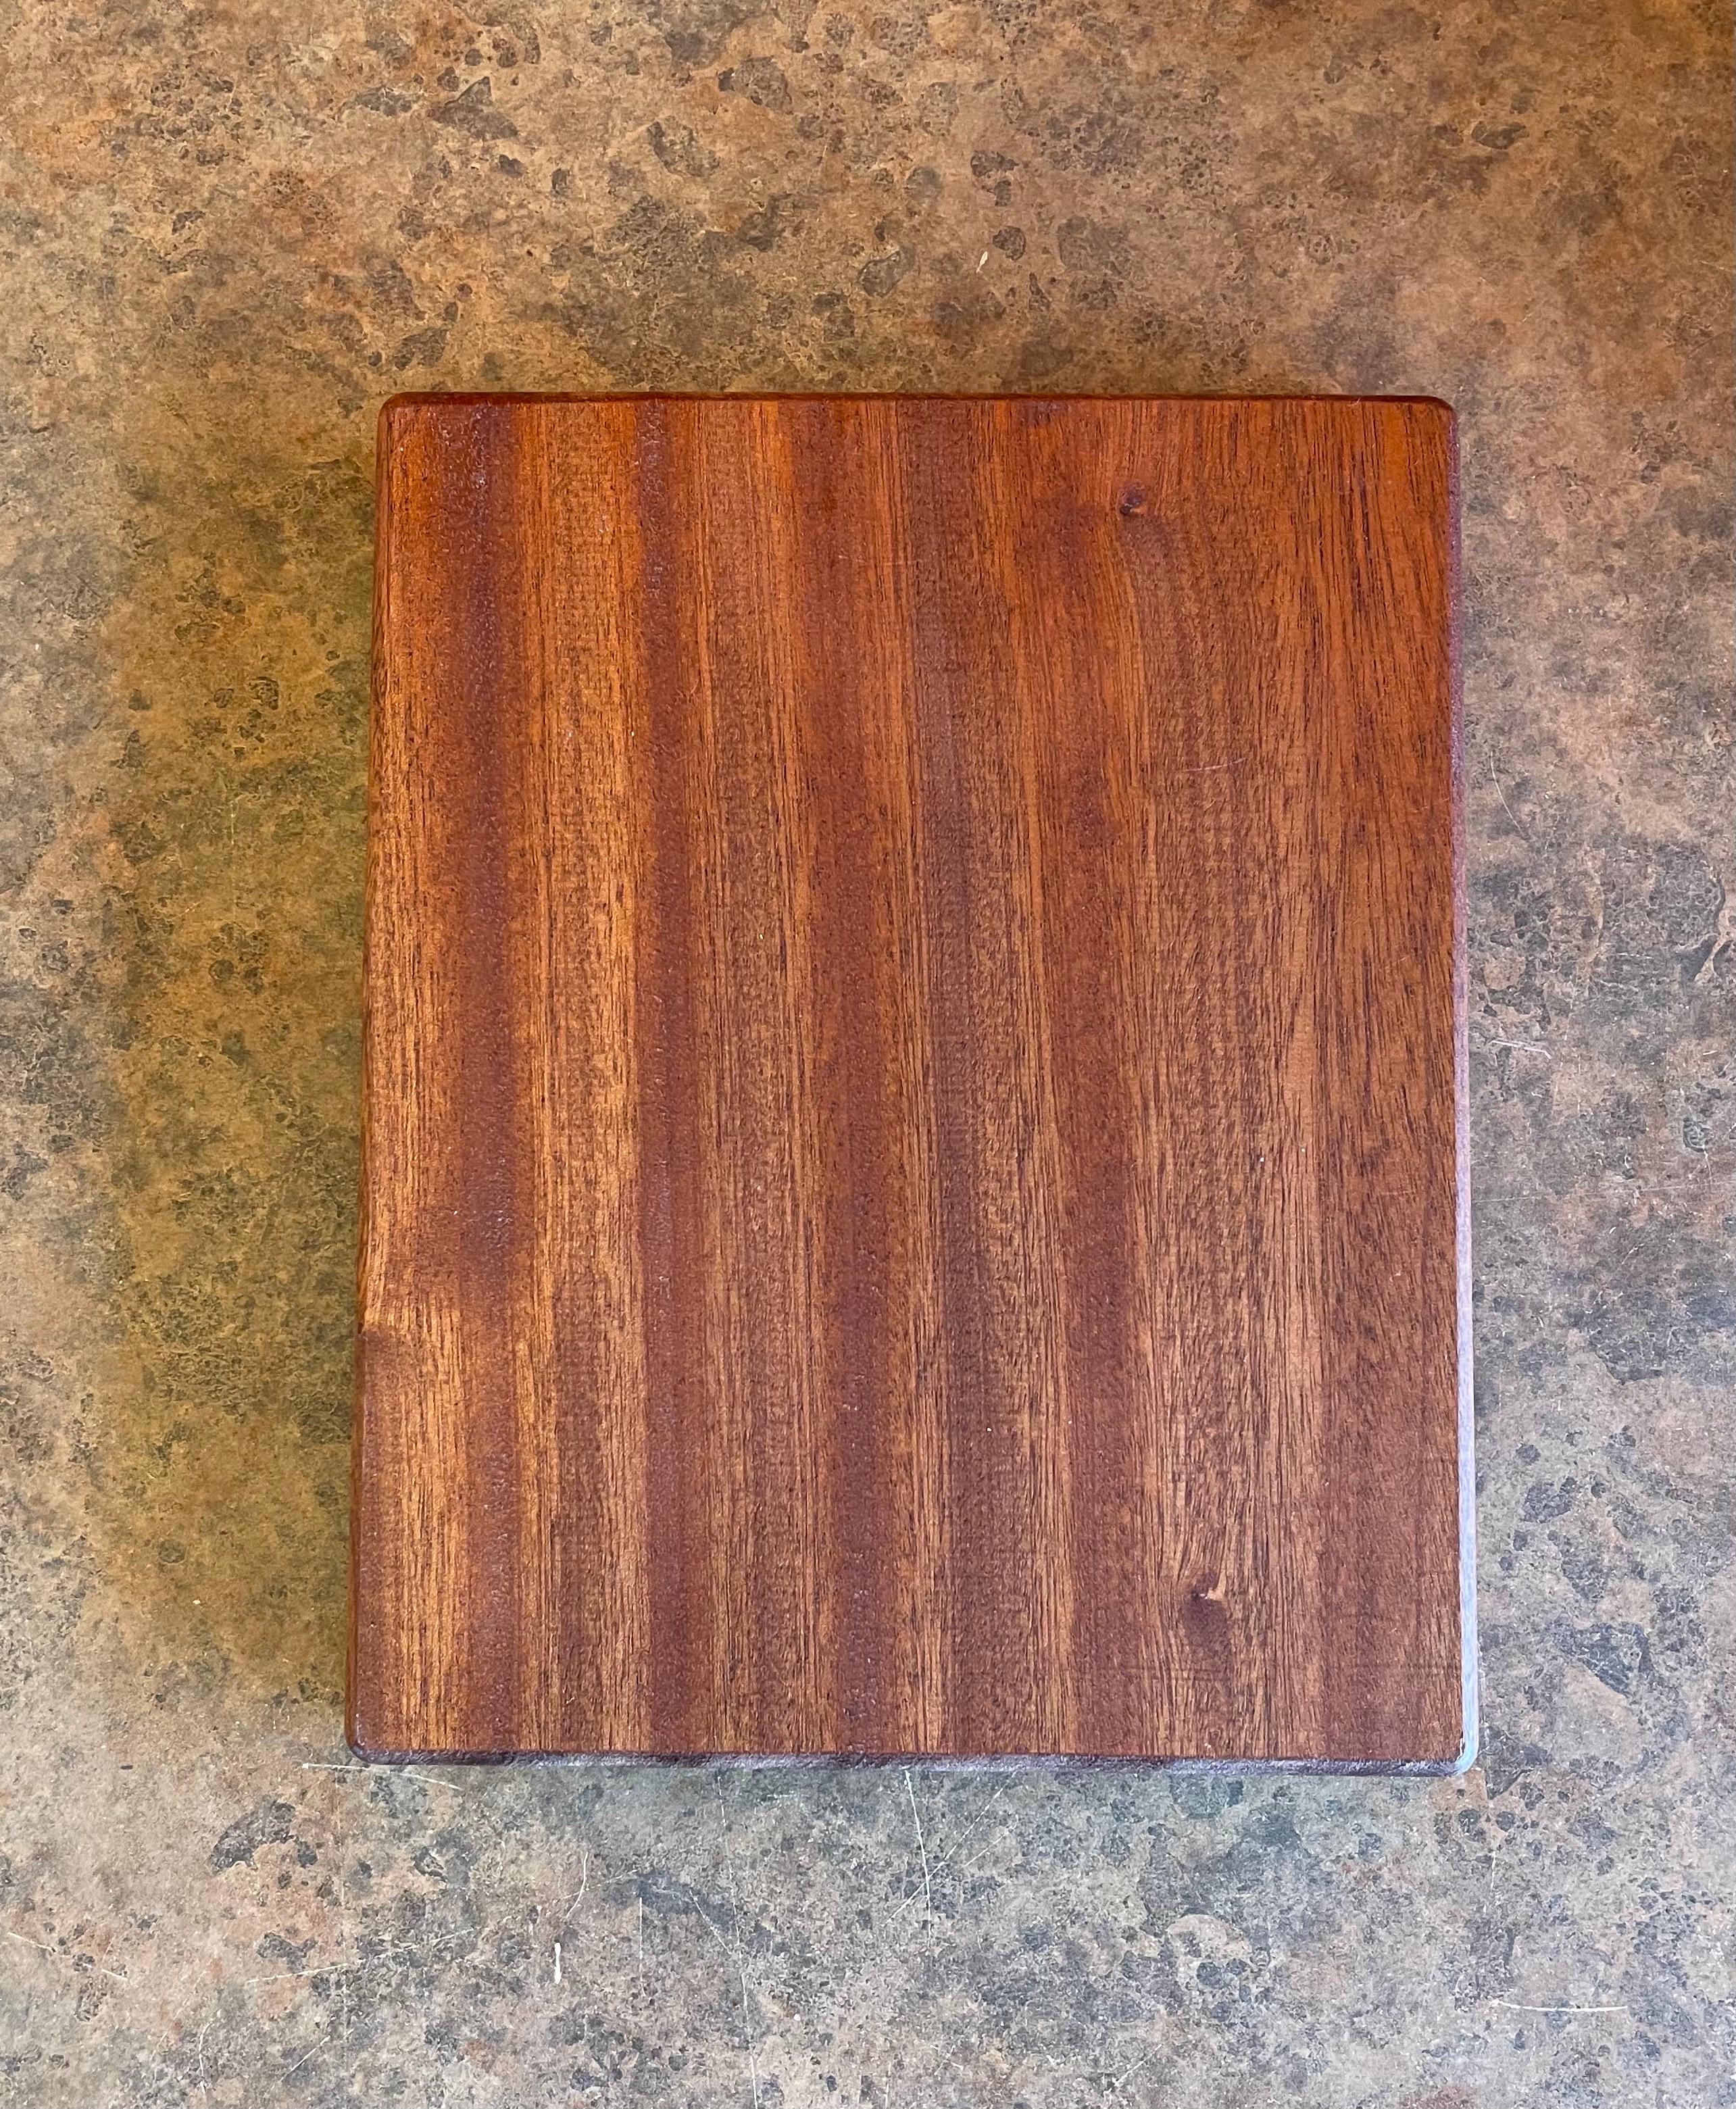 Midcentury Walnut Trinket Tray / Catch All In Good Condition For Sale In San Diego, CA